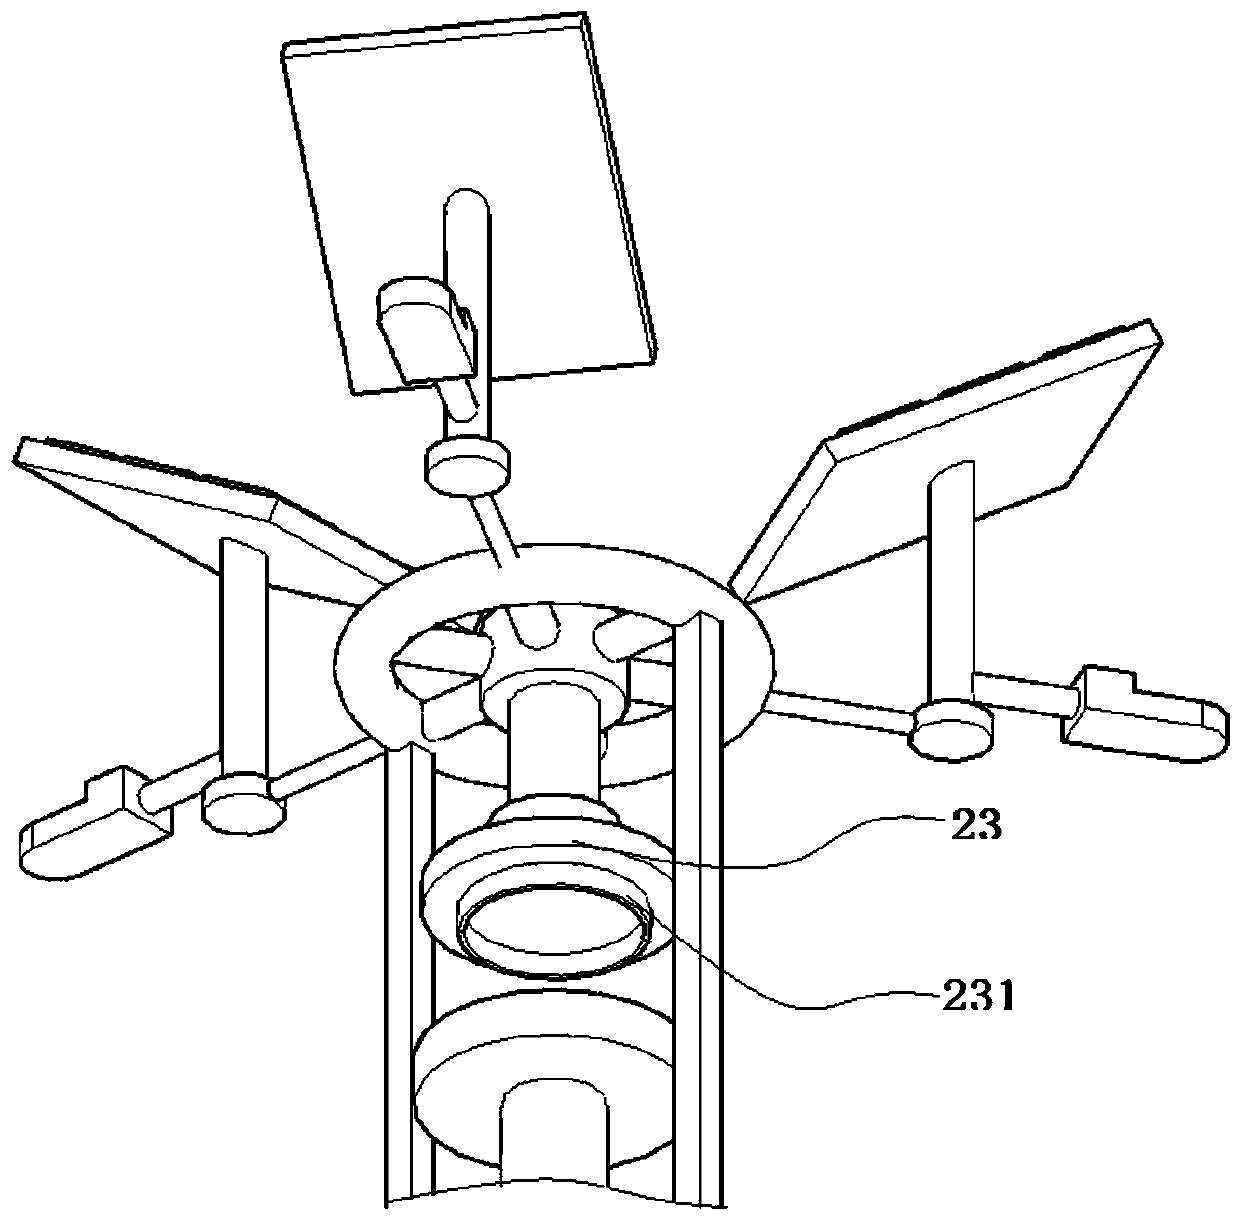 Solar street lamp convenient to disassemble